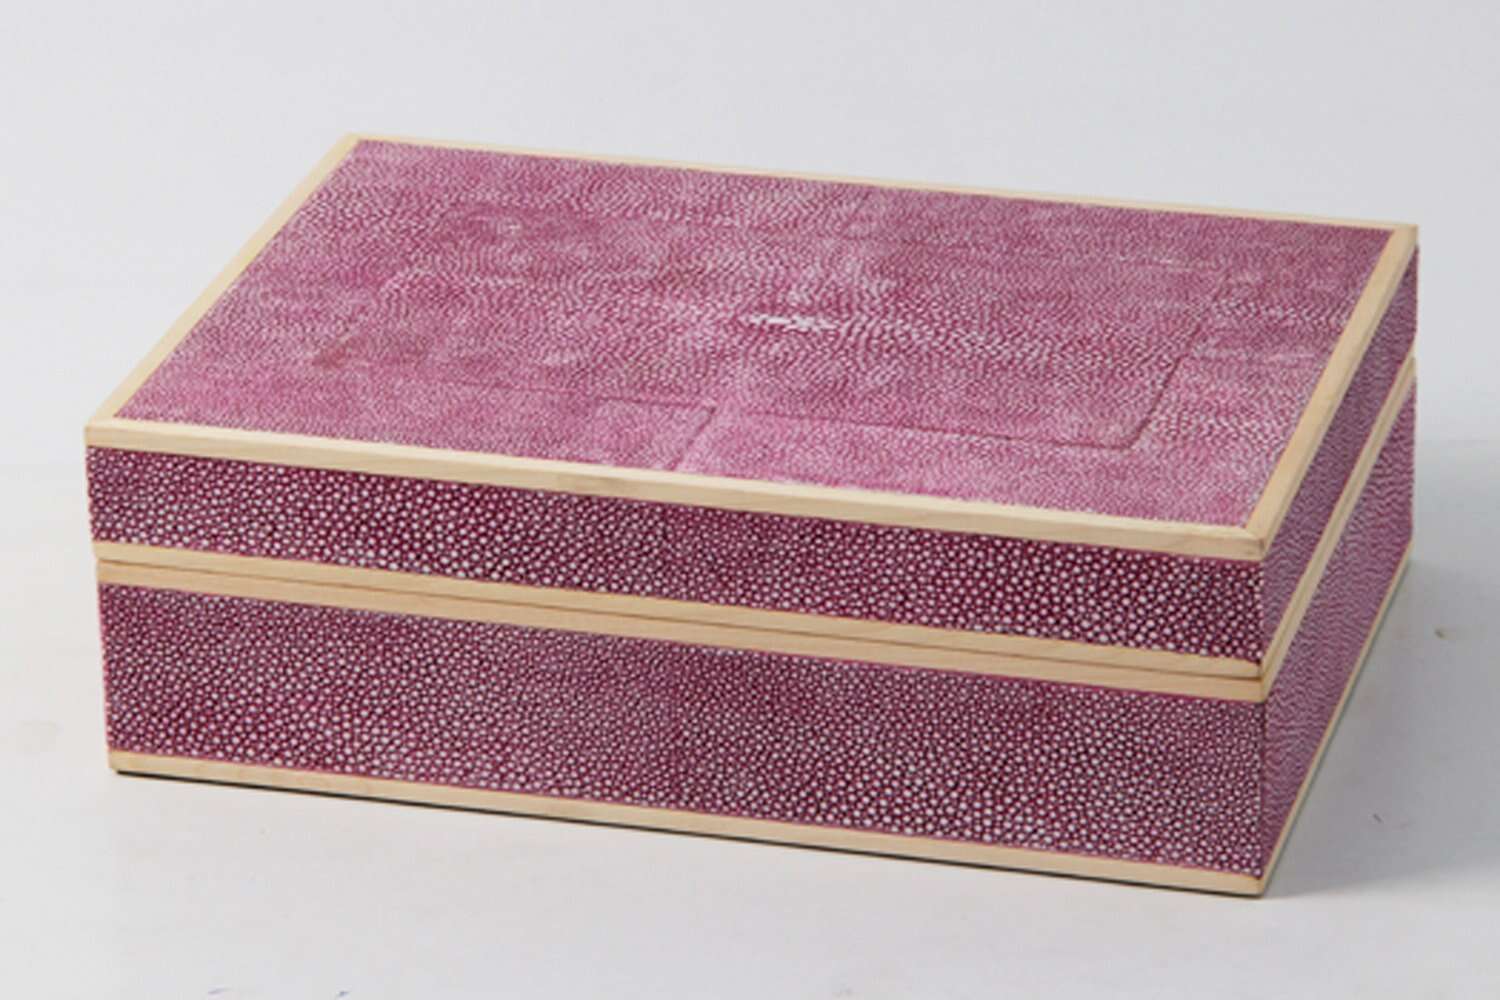 Unique Barbie pink shagreen jewelry box with jewelry tray and mirror